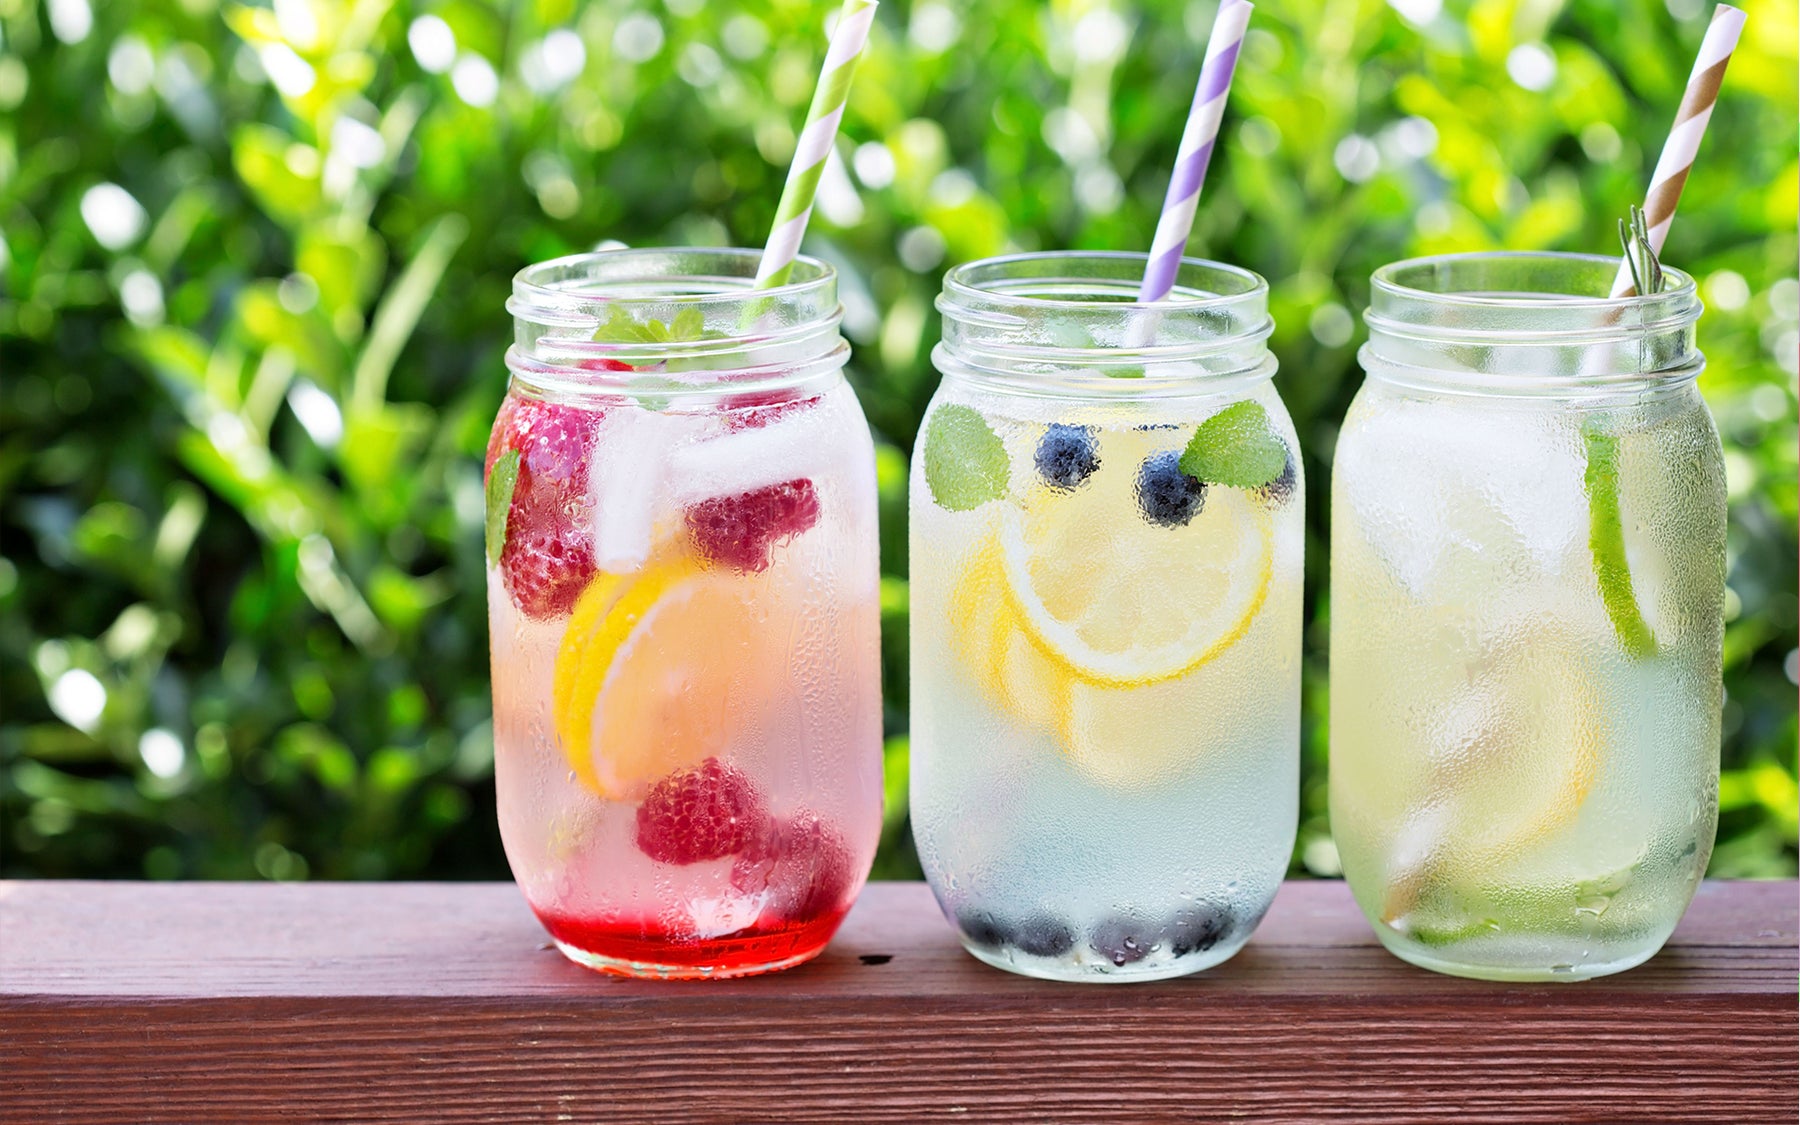 8 Refreshing Drinks to Sip After Your Summer Workout